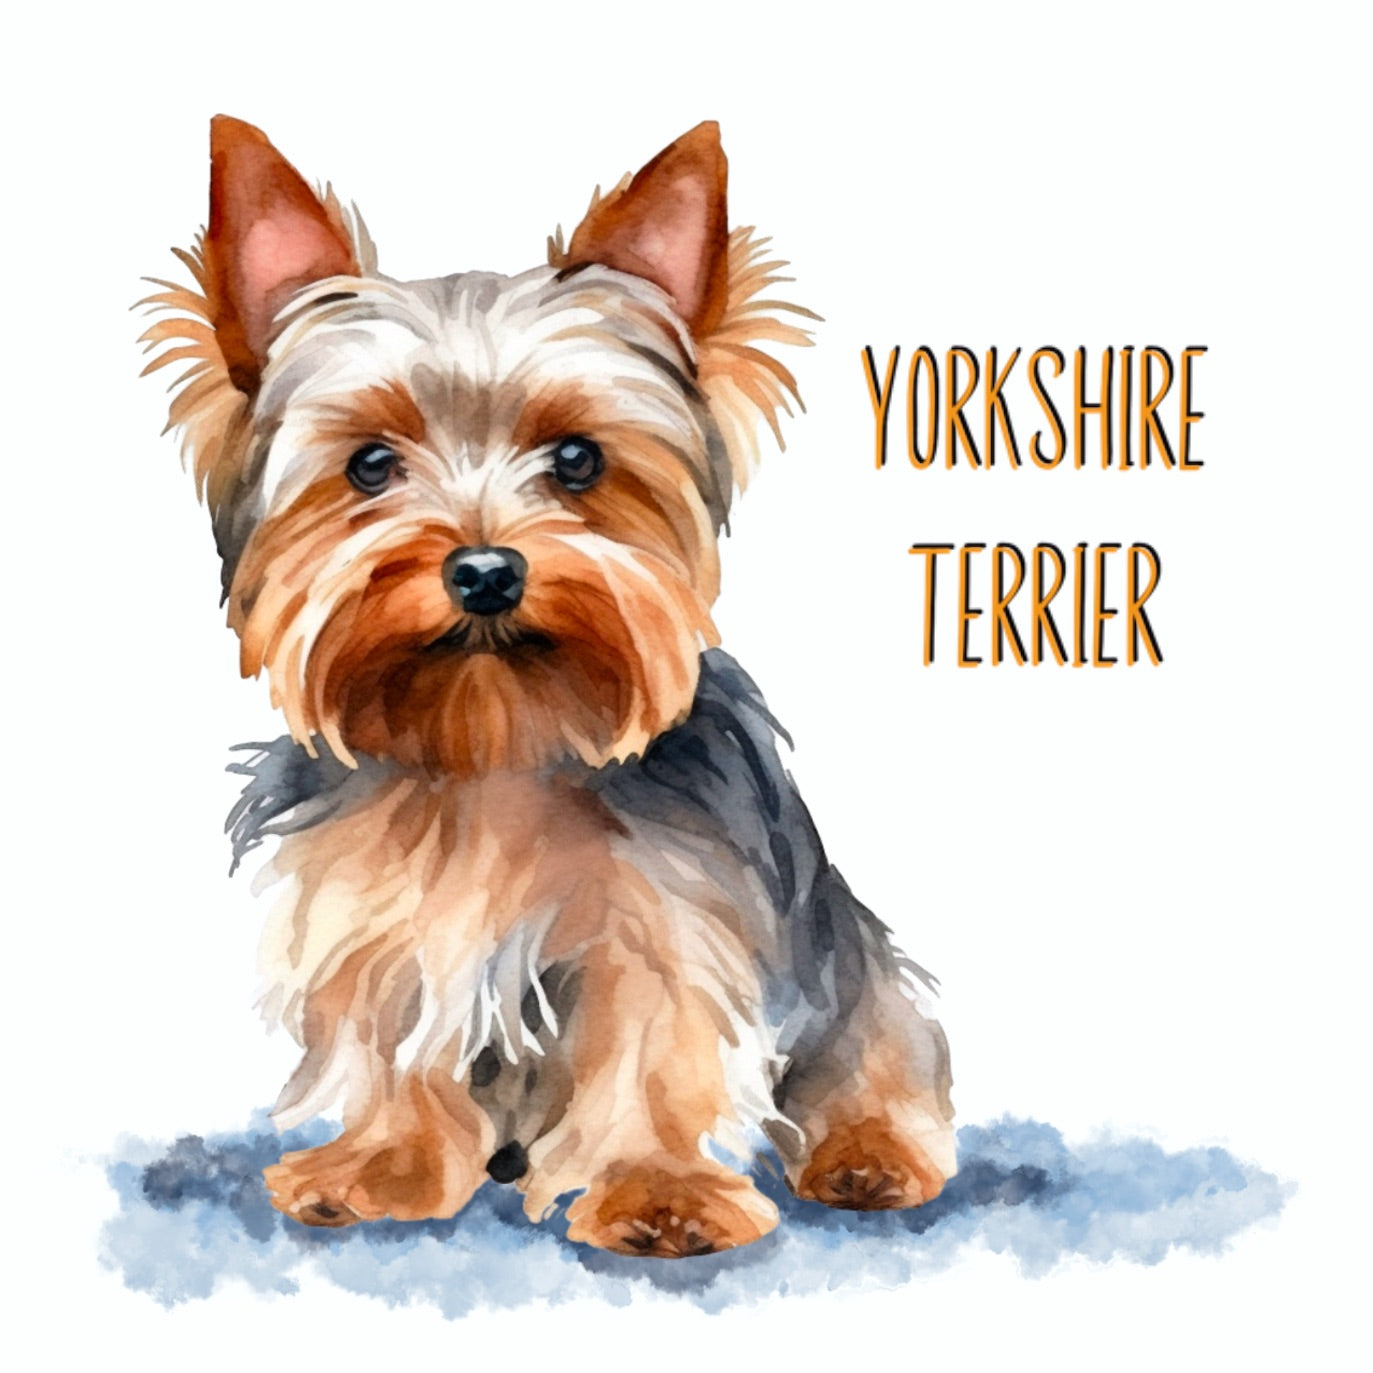 Yorkshire Terrier Dog Art Square Personalised Coaster Gift Idea